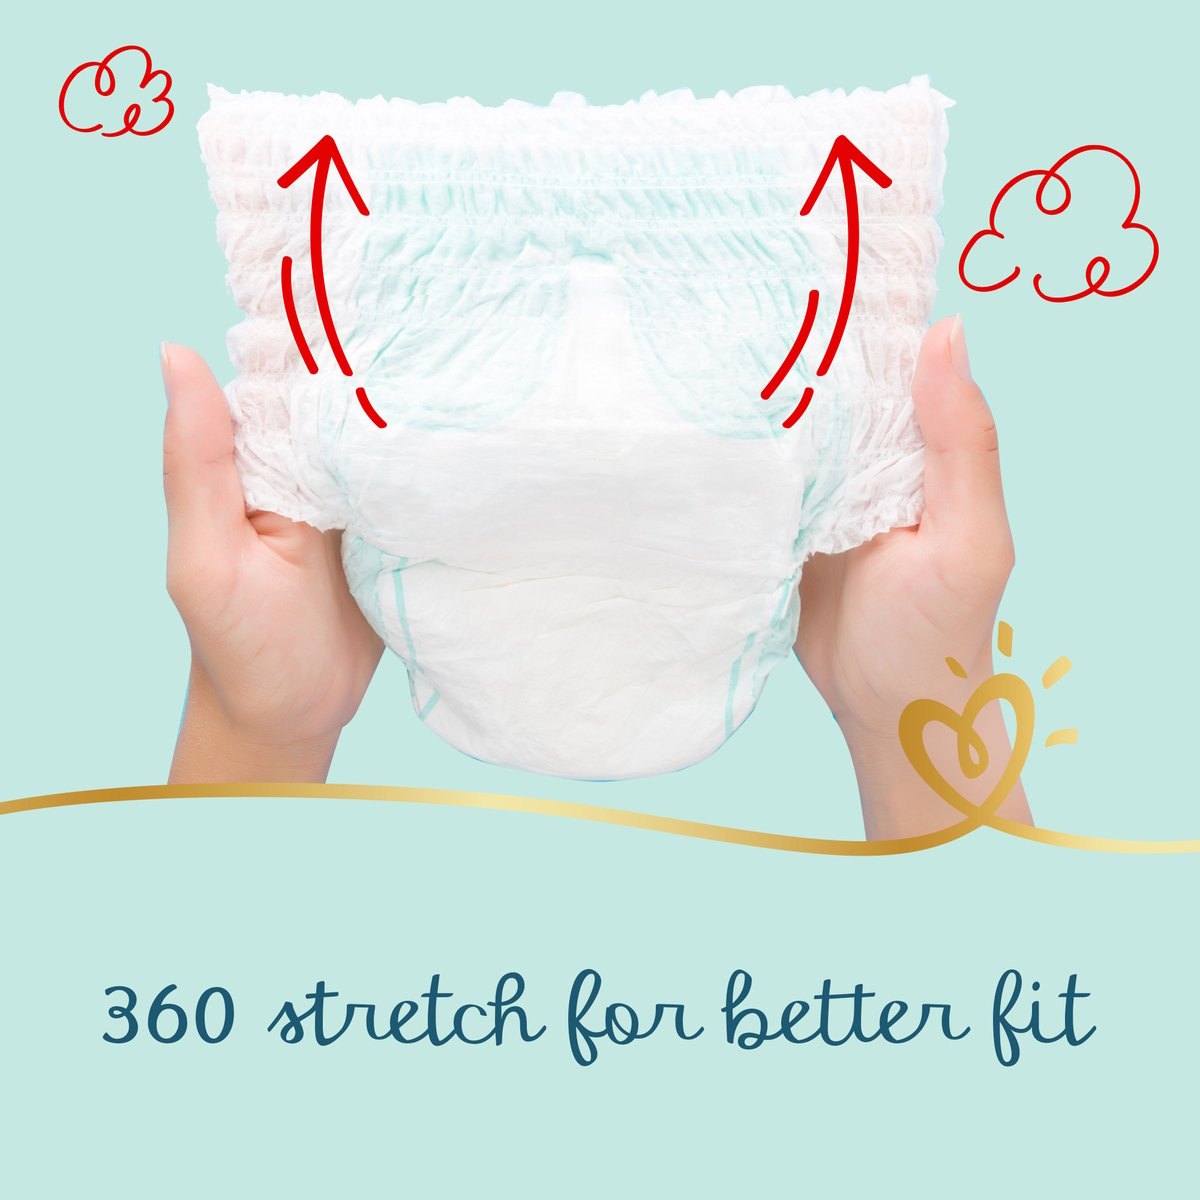 Pampers Premium Care Pants Diapers Size 6, 16+kg with Stretchy Sides for Better Fit 18pcs